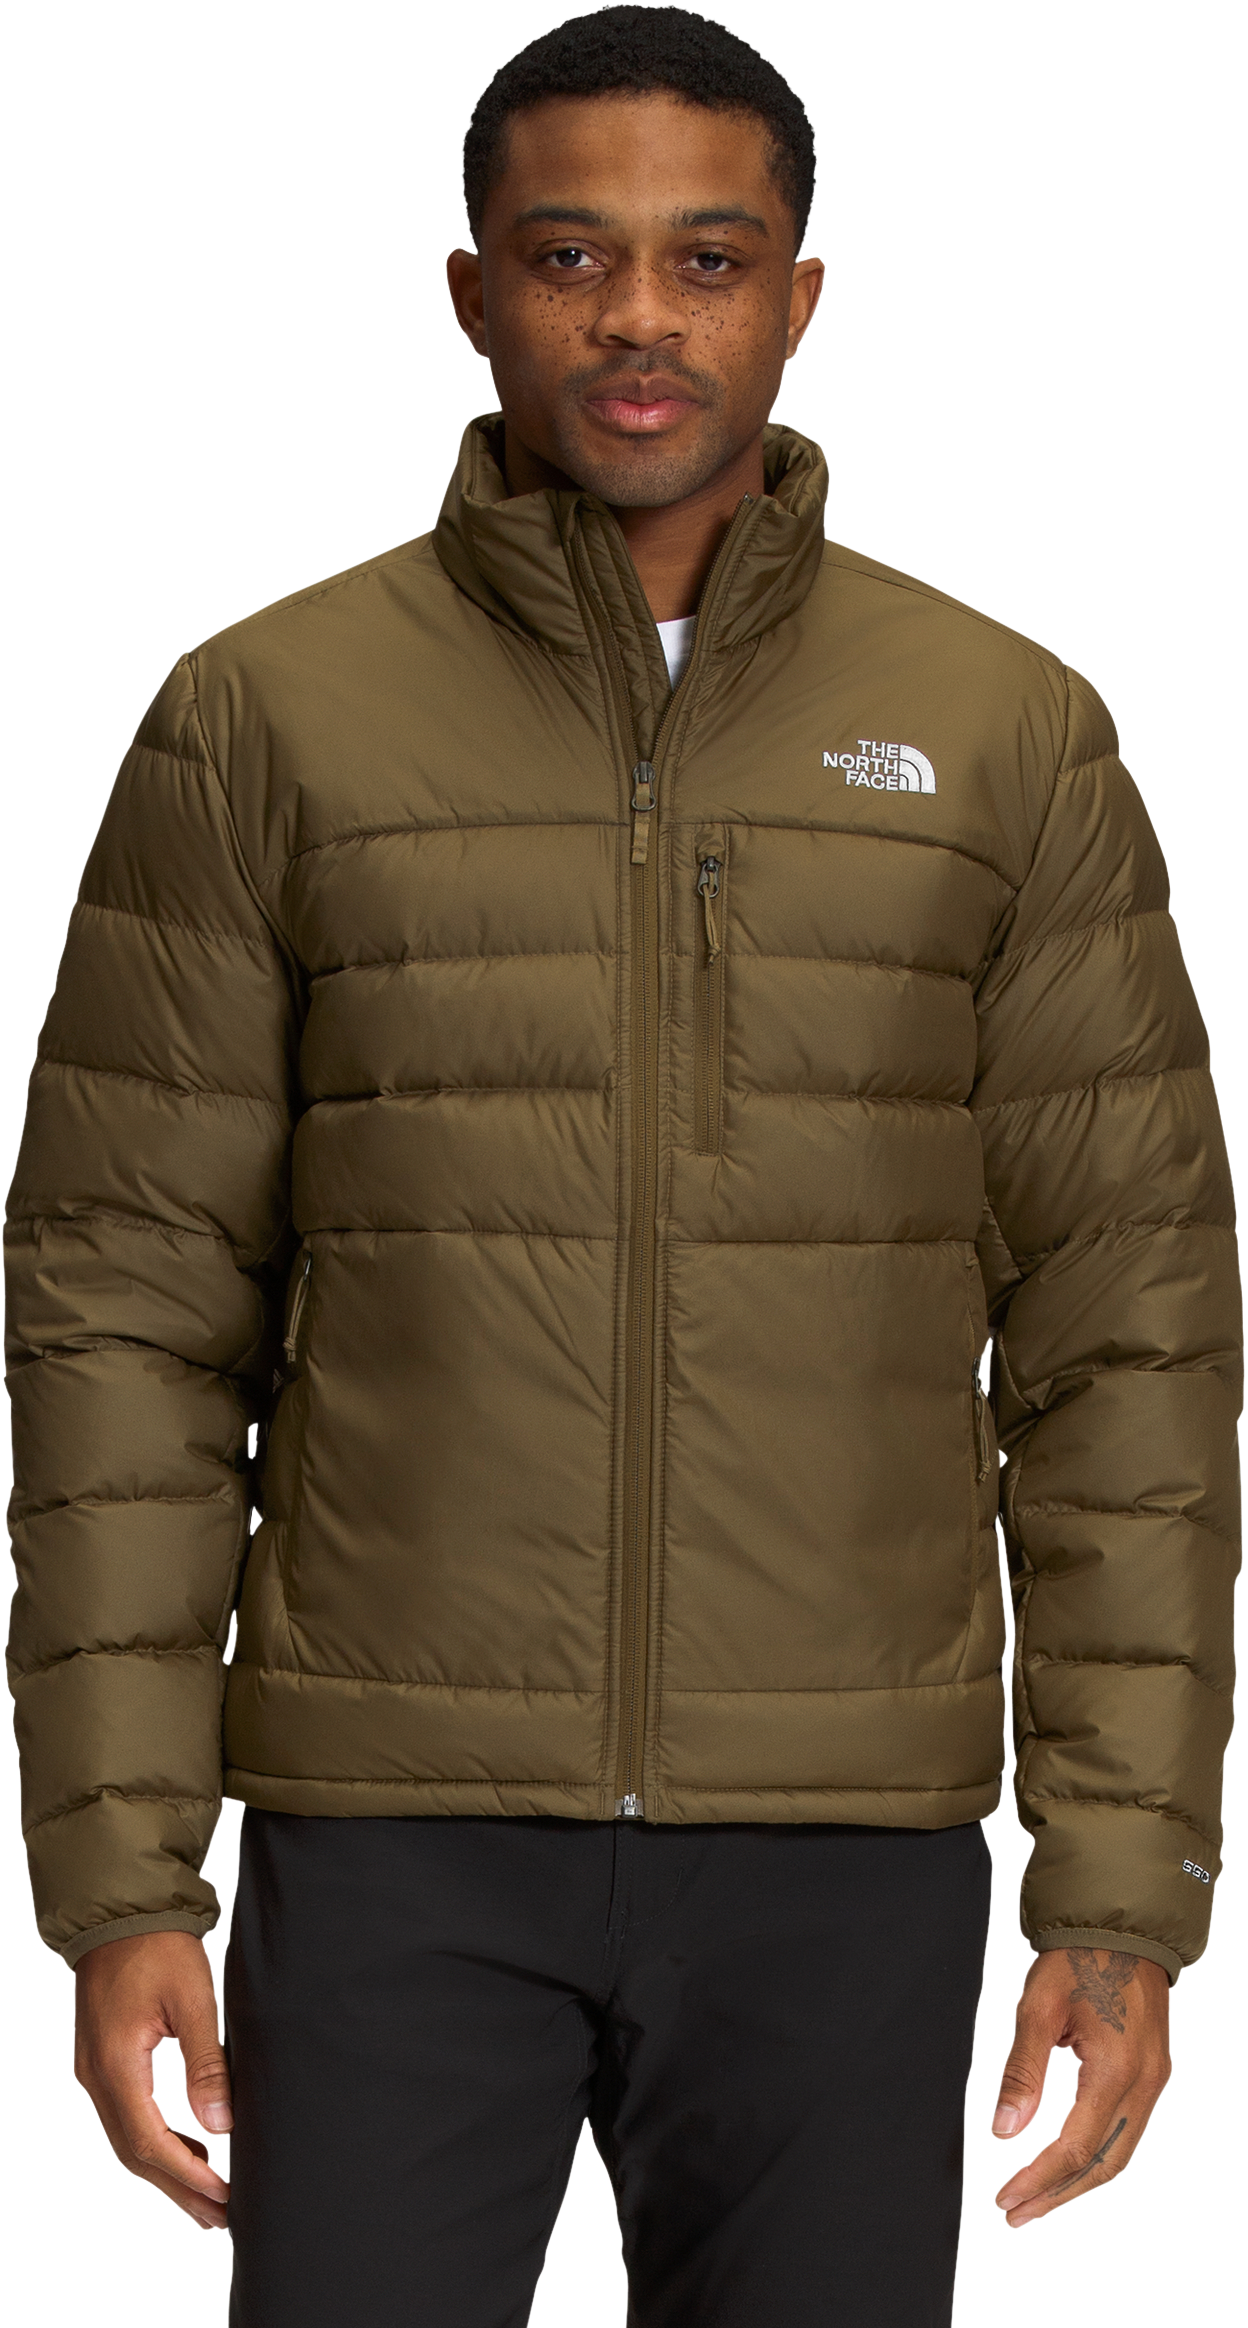 The North Face Aconcagua 2 Jacket for Men - Military Olive - 2XL